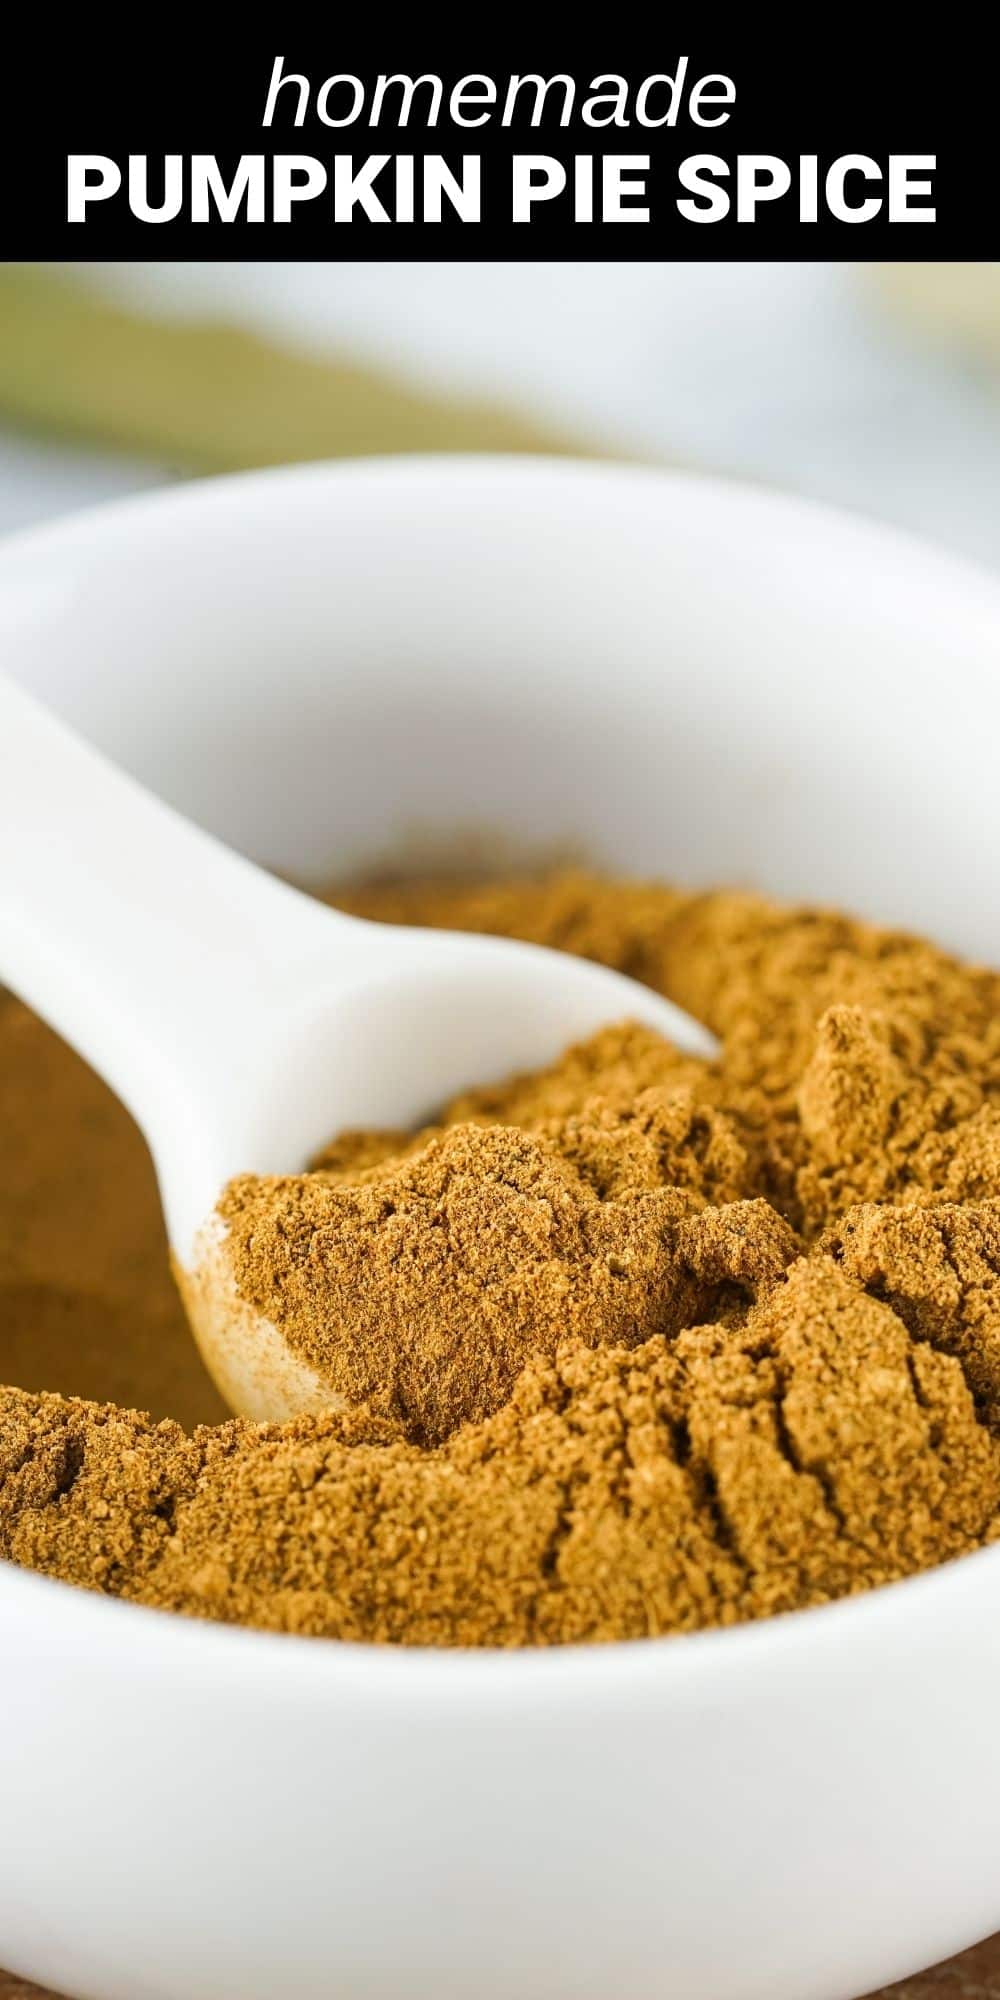 This easy-to-make recipe for Pumpkin Pie Spice is full of warm and cozy flavors of the fall season. It makes the perfect addition to your favorite pumpkin flavored sweet treats, baked goods and beverages.